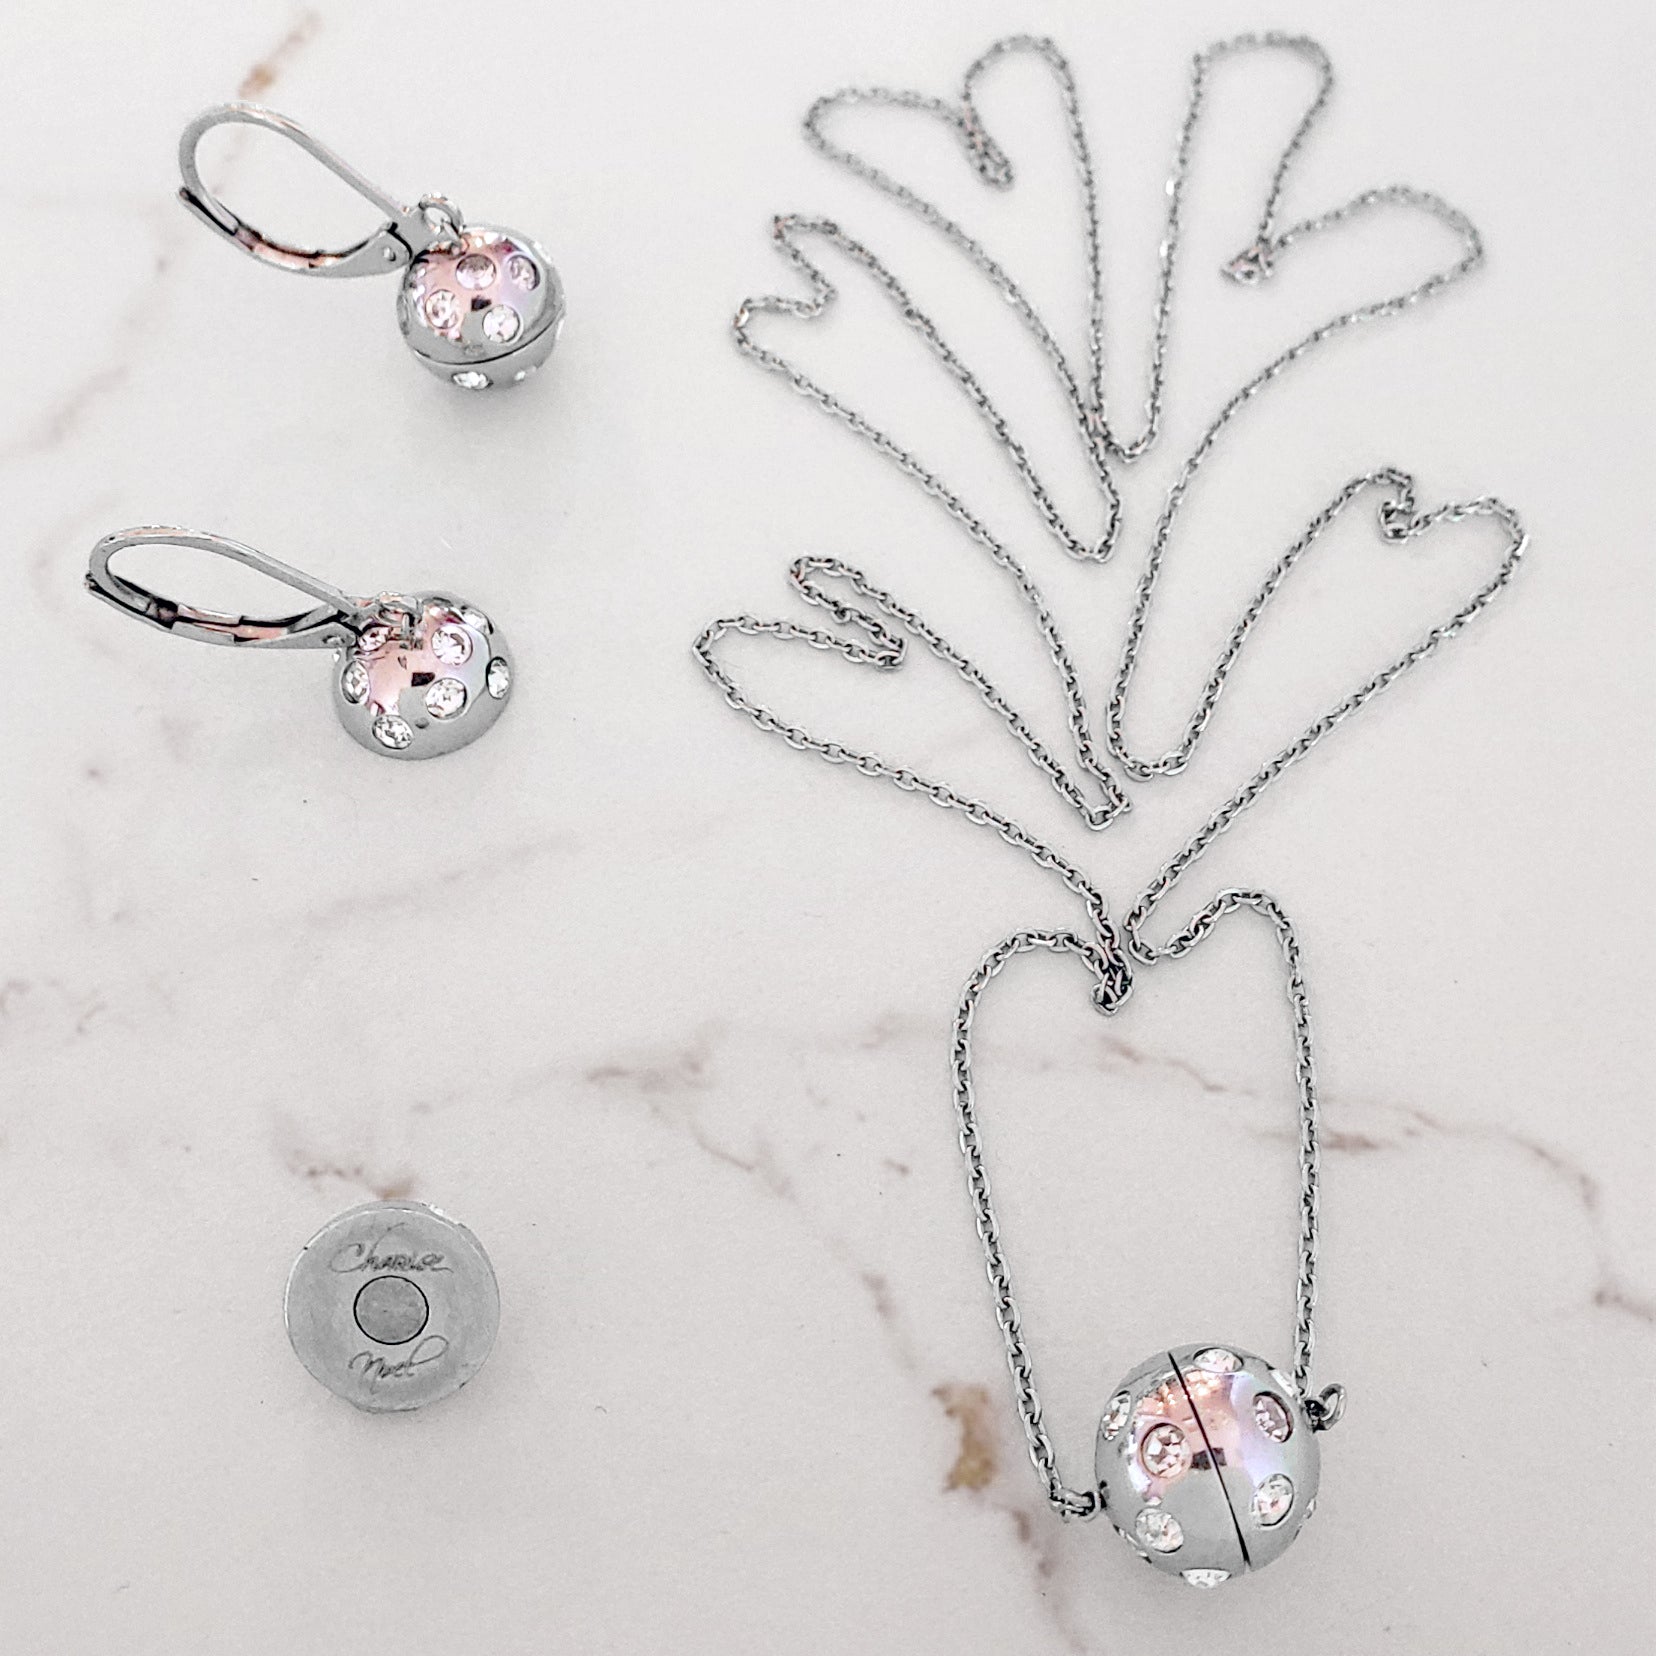 A Complete Set: Necklace, Earrings & Ball Ending